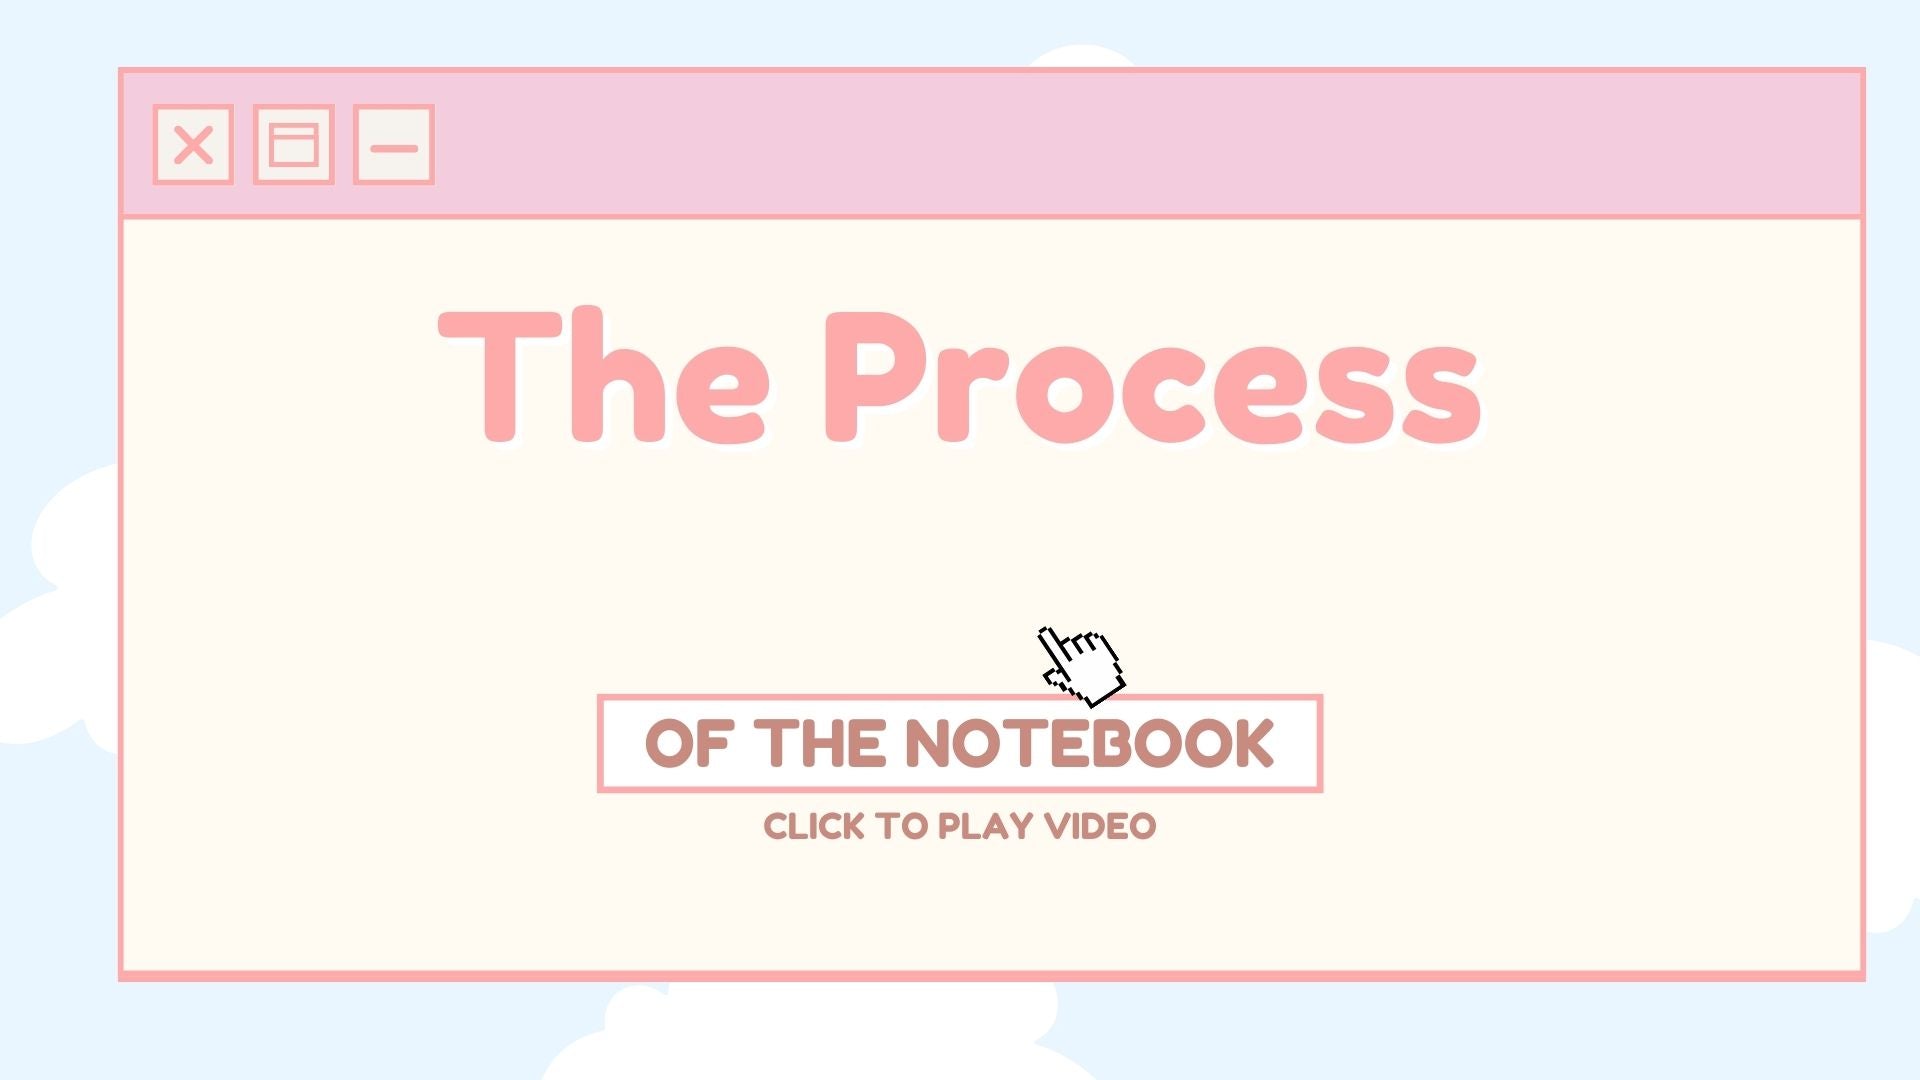 Load video: Video of the features of the notebook